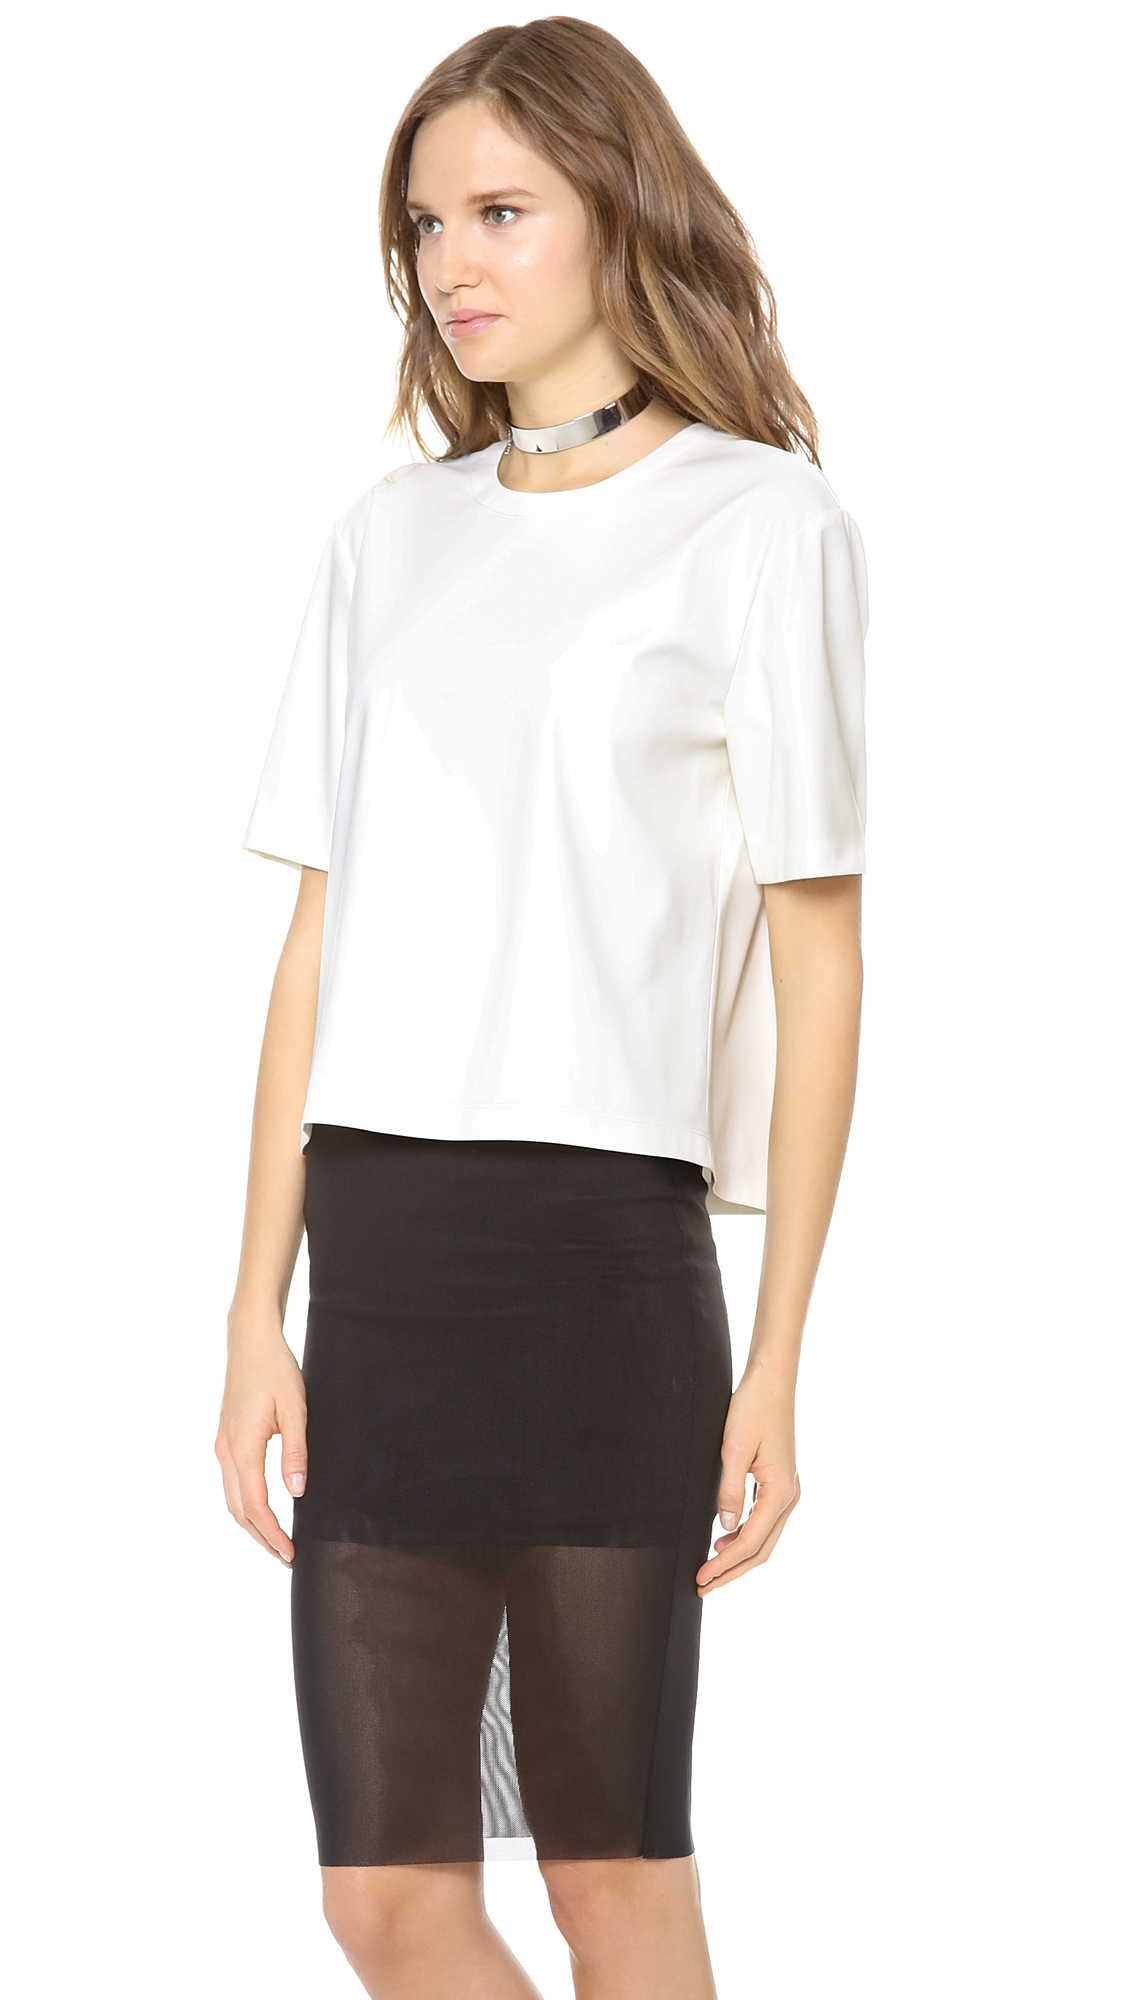 Lyst - Bcbgmaxazria Micah Faux Leather Top in White